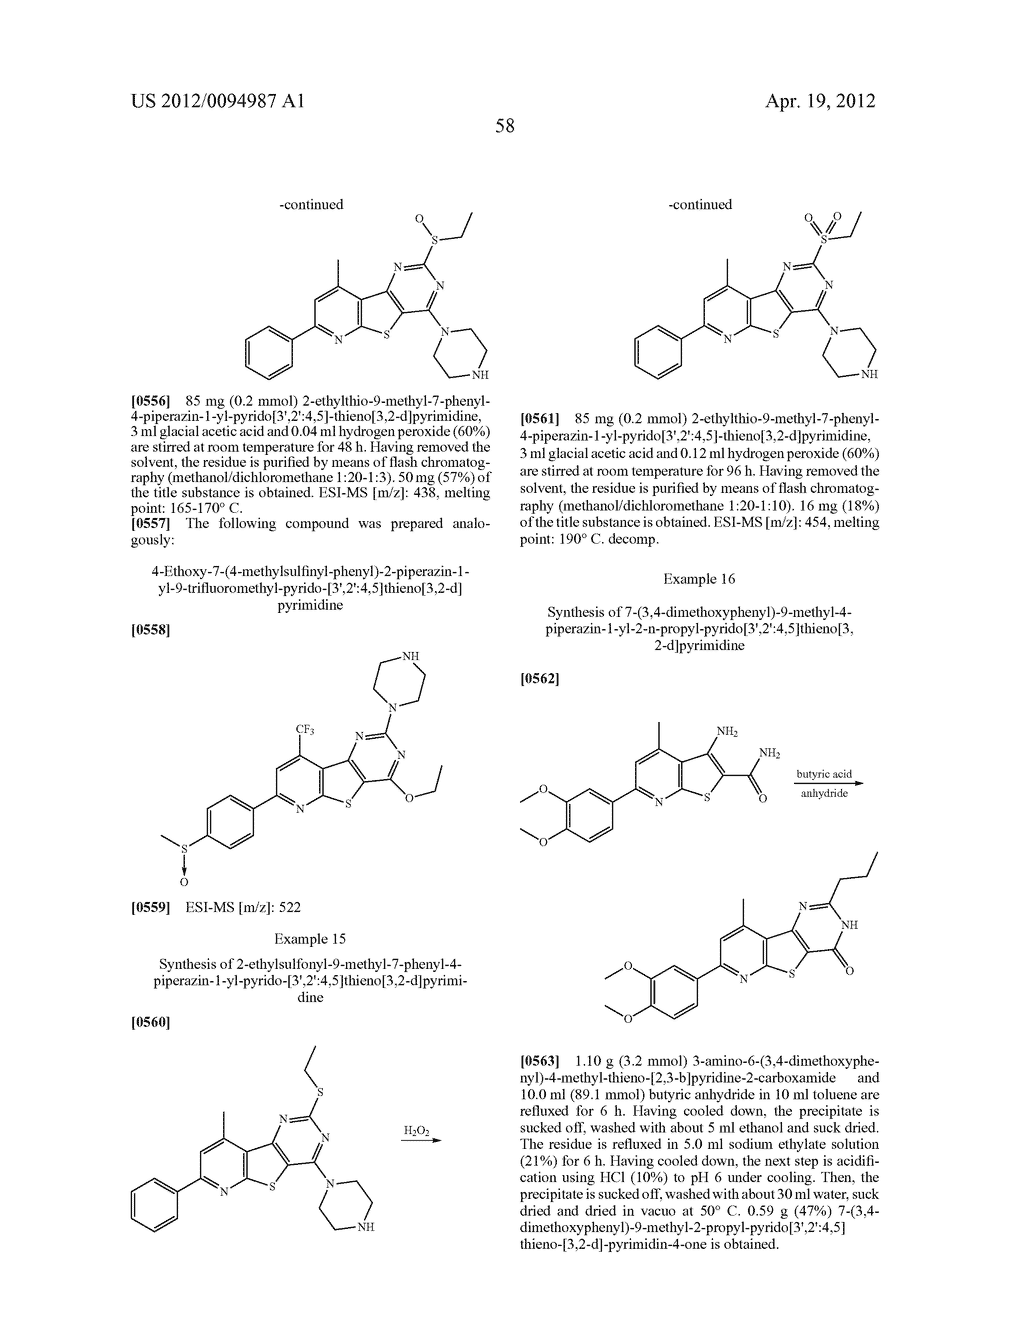 SUBSTITUTED PYRIDO [3', 2': 4, 5] THIENO [3, 2-D] PYRIMIDINES AND PYRIDO     [3', 2': 4, 5] FURO [3, 2-D] PYRIMIDINES USED AS INHIBITORS OF THE PDE-4     AND/OR THE RELEASE OF TNF-alpha - diagram, schematic, and image 60